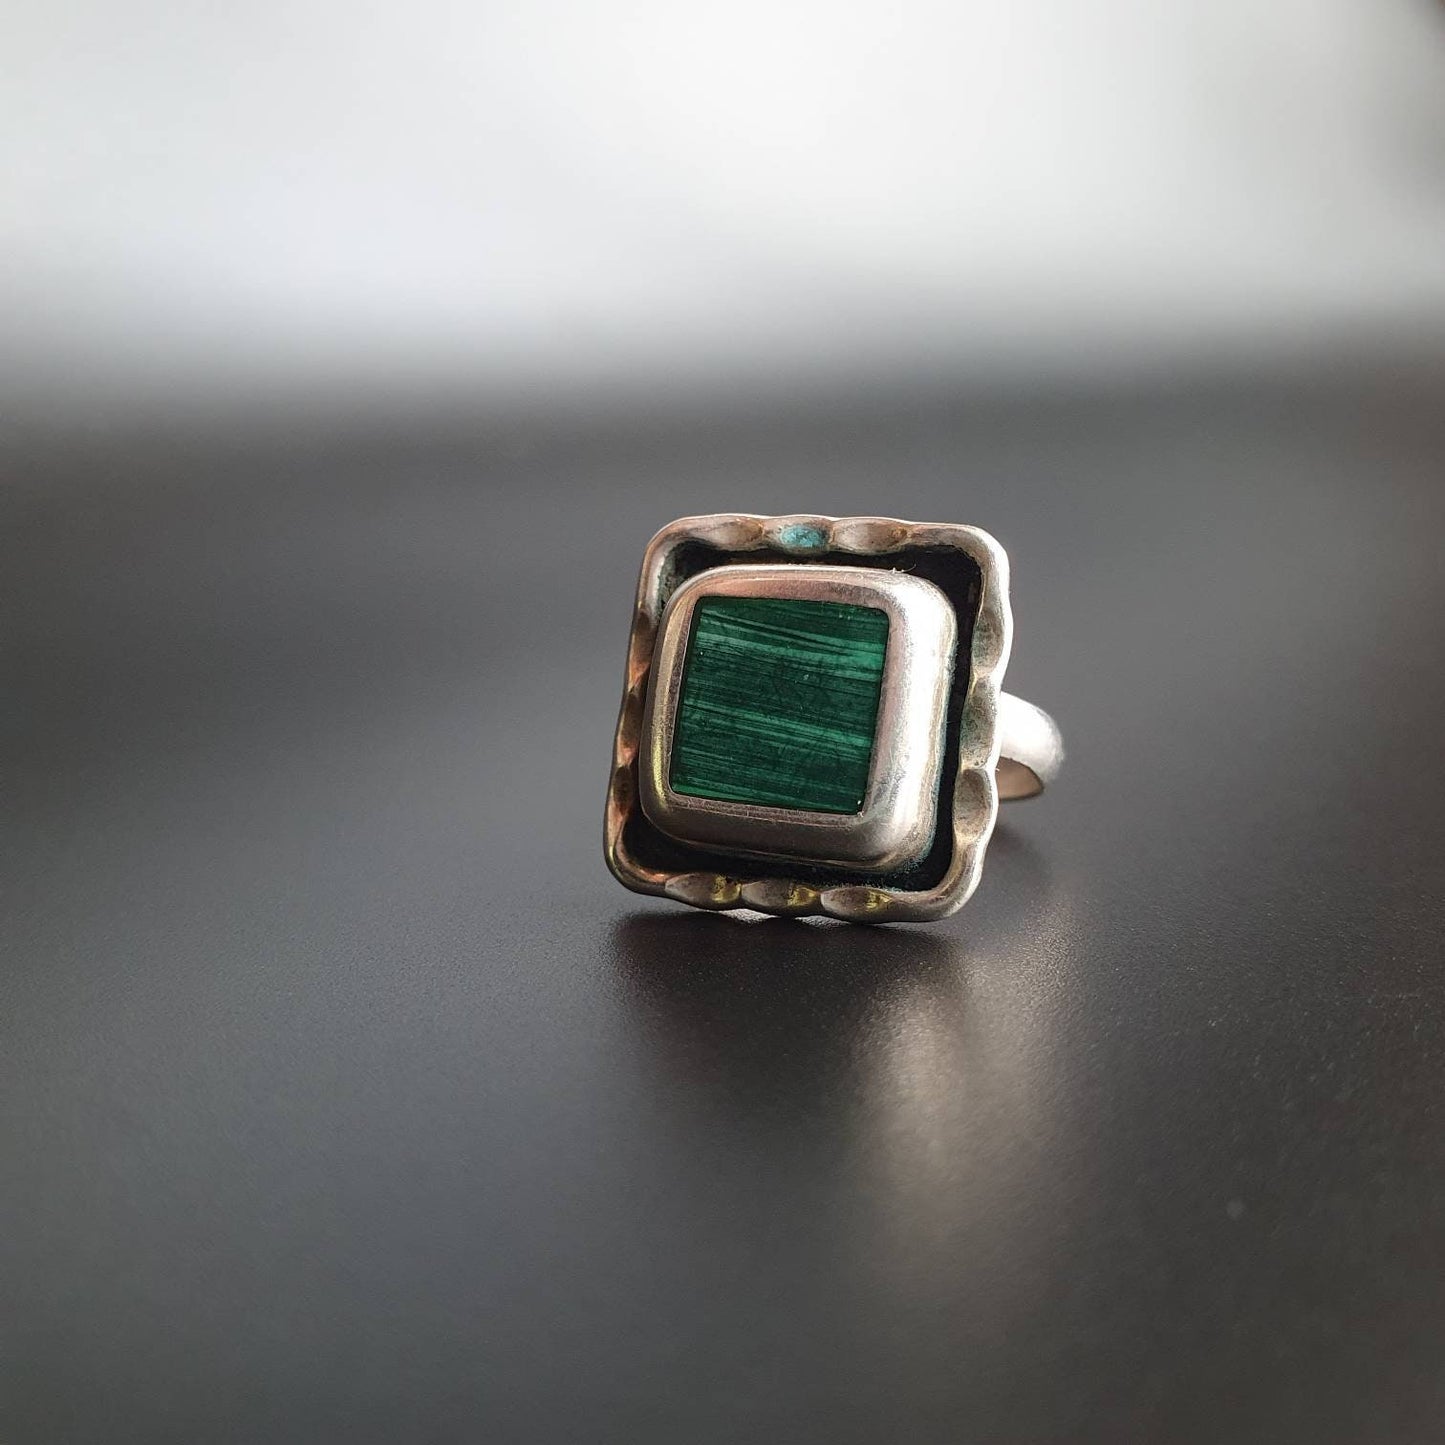 Silver ring, sterling silver statement ring, malachite gemstone, unique jewelry, handmade, vintage, ring, gifts,boho jewelry, ethnic